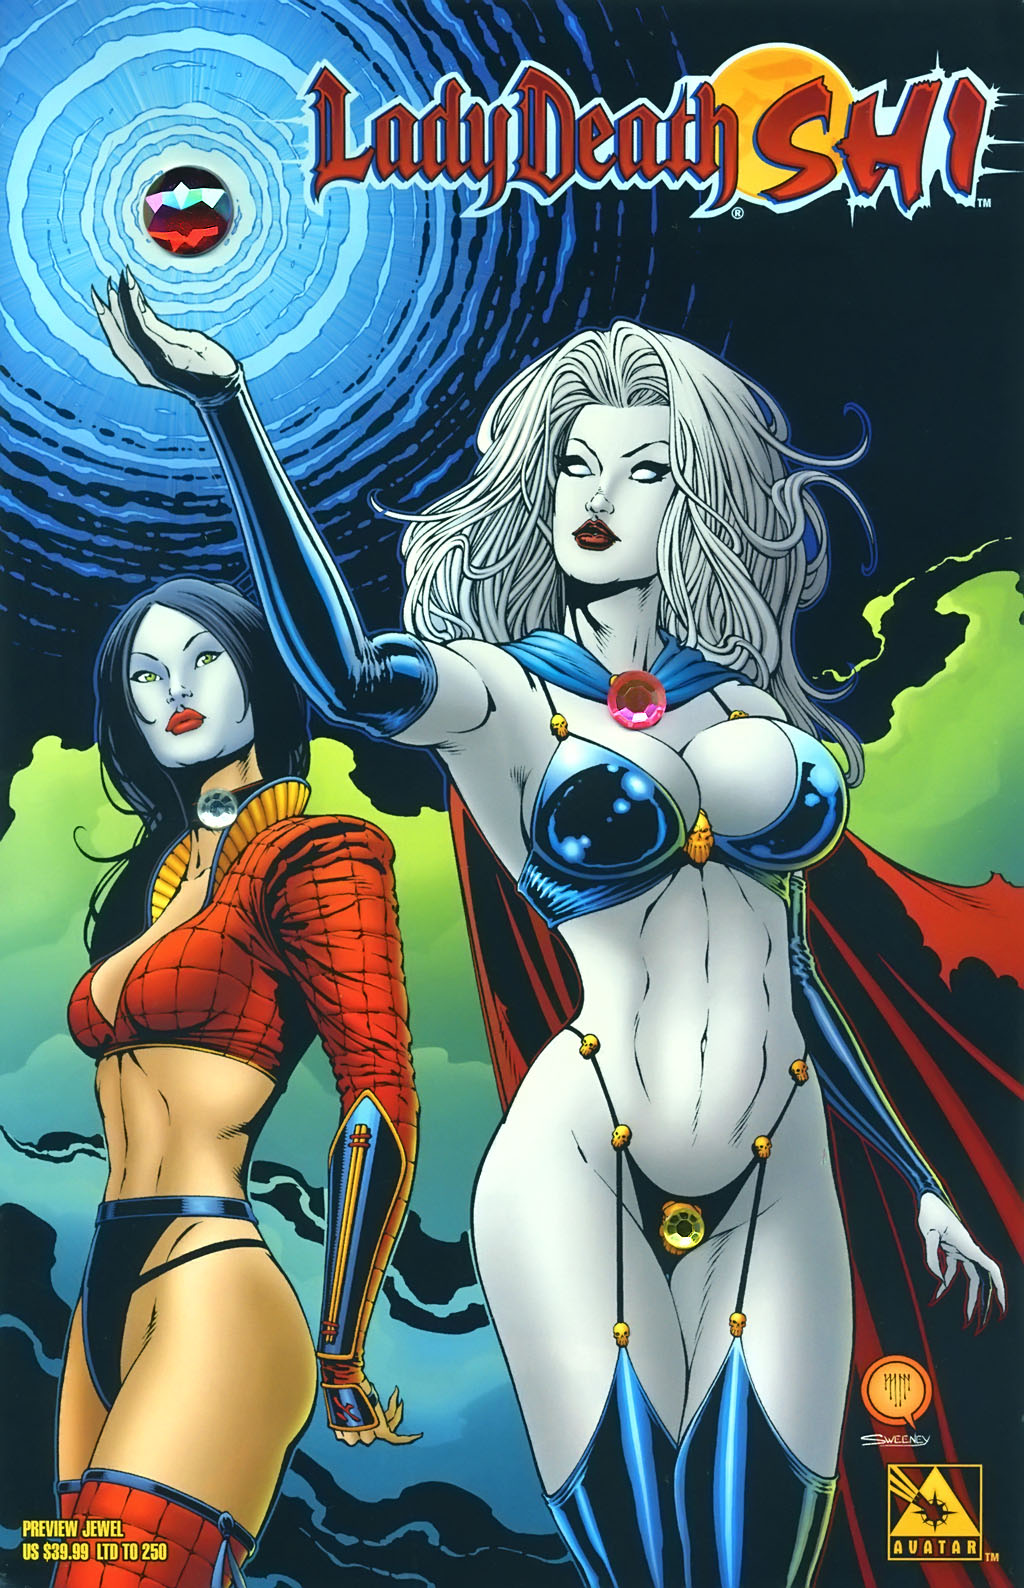 Read online Lady Death/Shi comic -  Issue # _Preview - 4